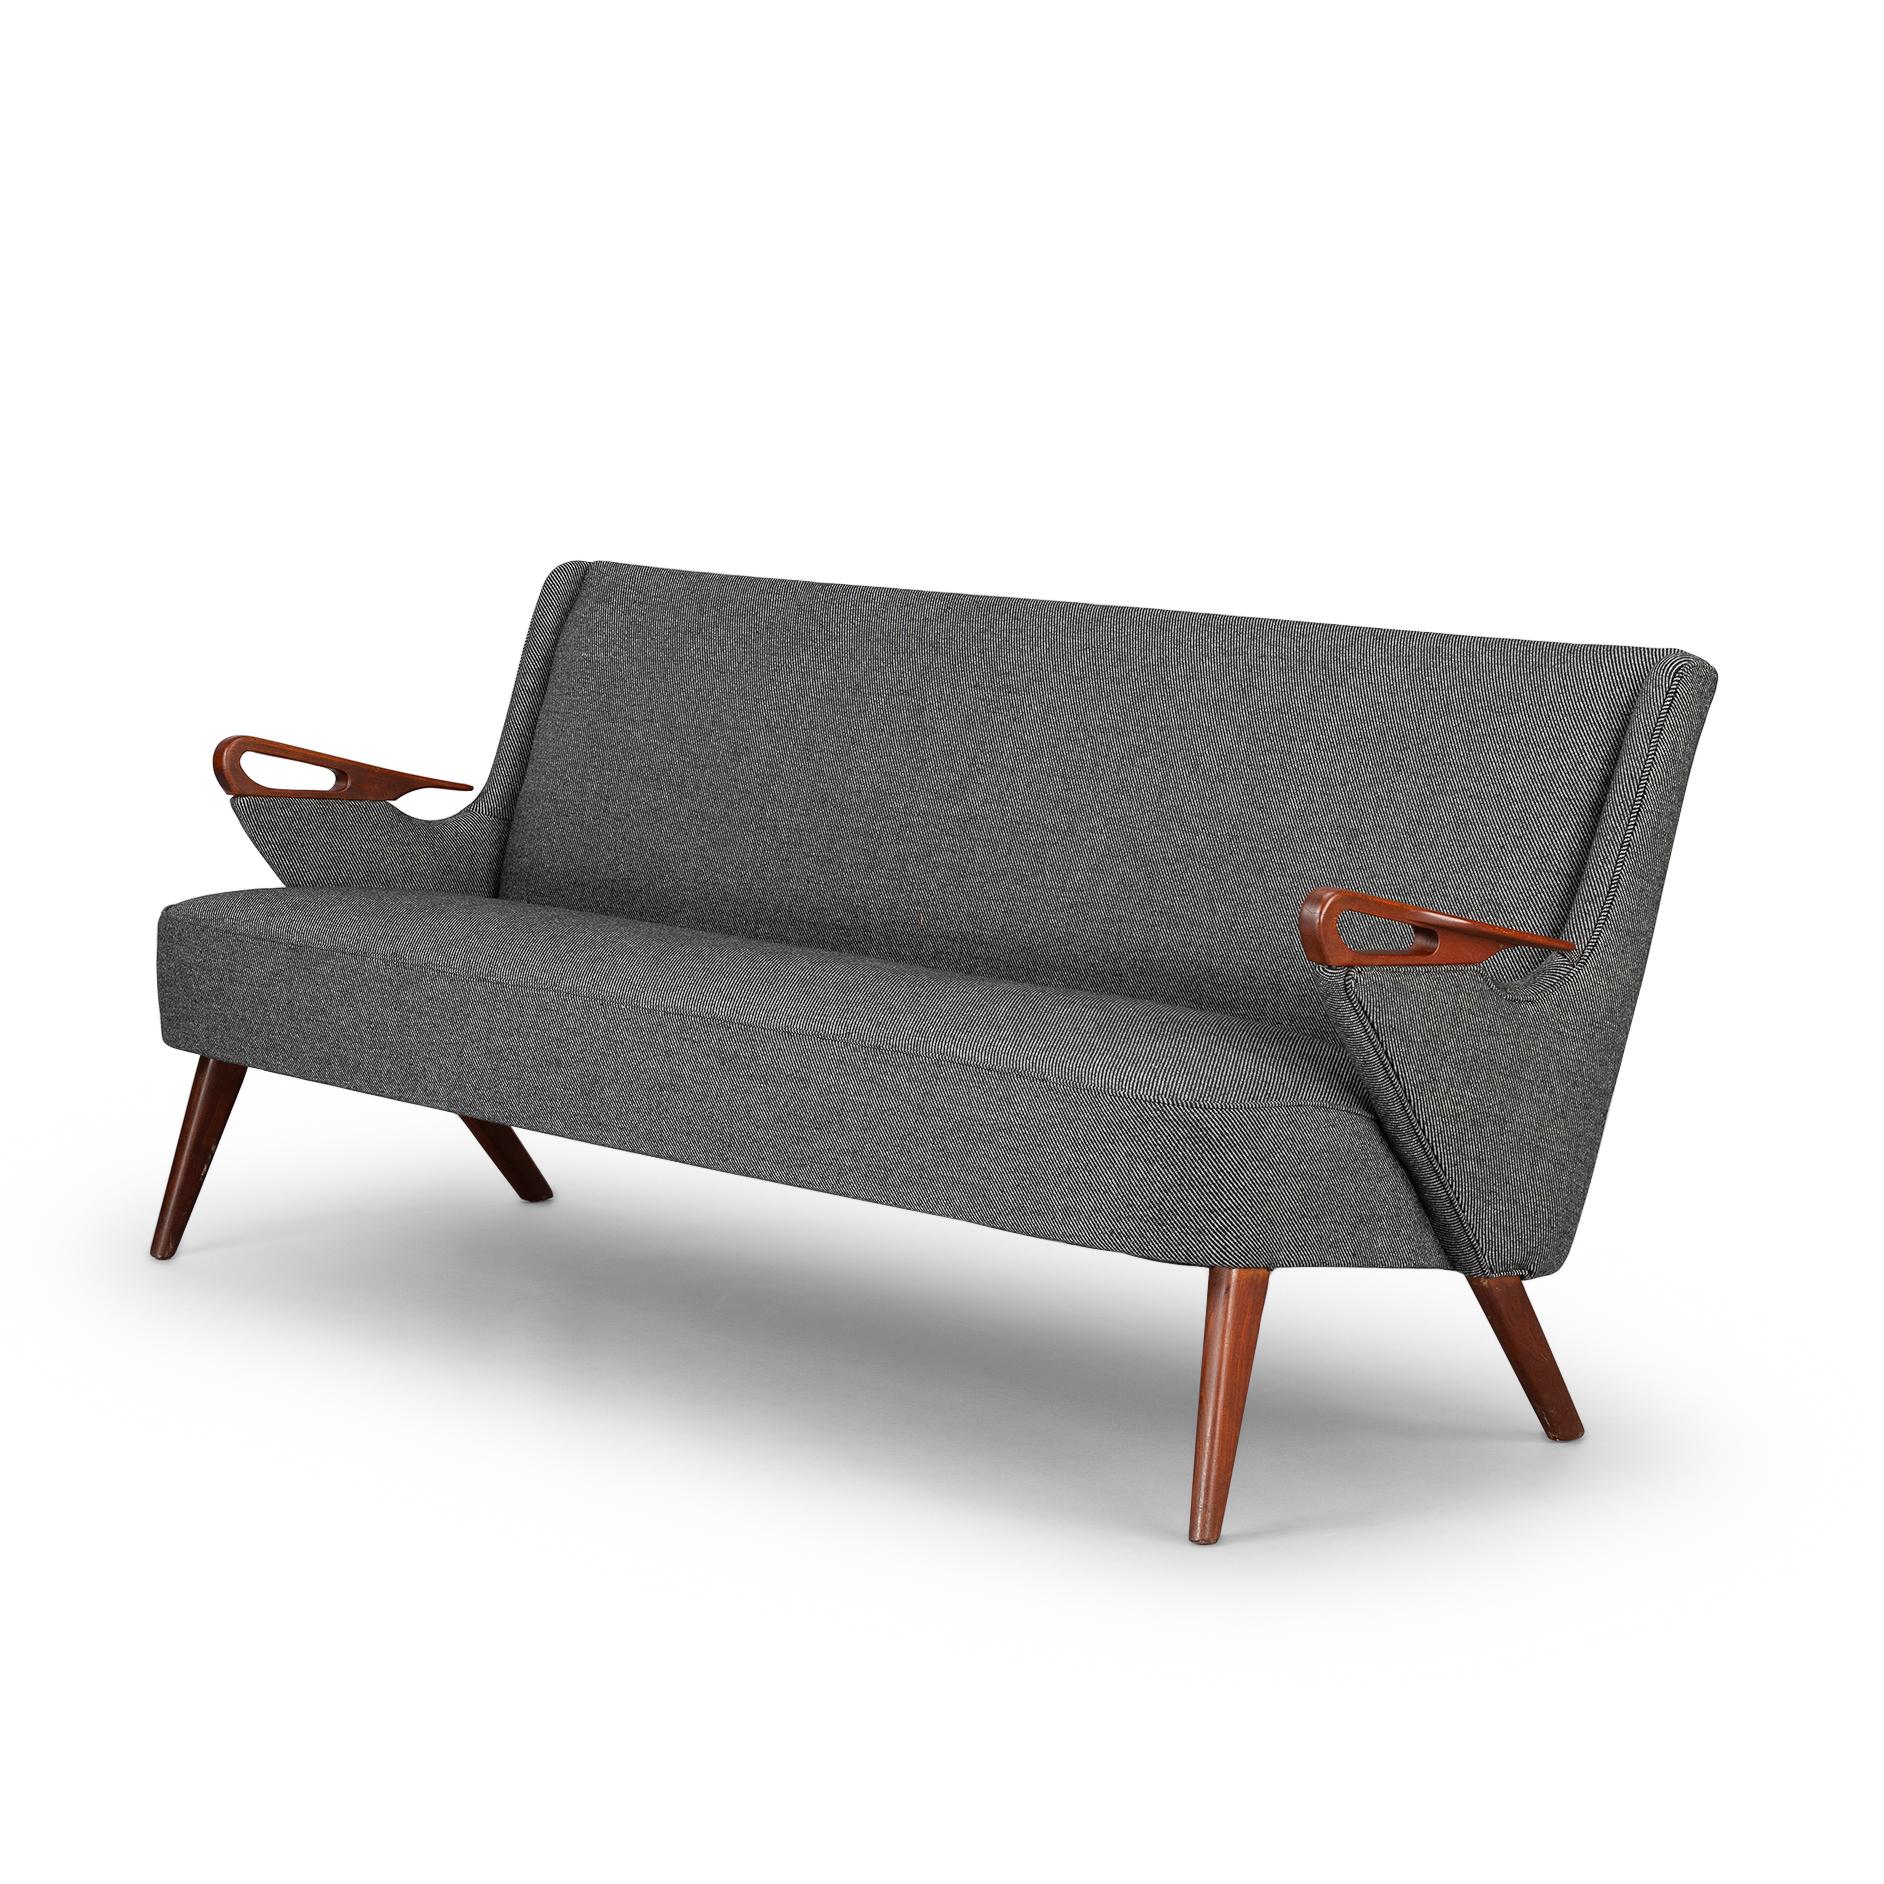 Wool Reupholstered Dark Grey 2.5 Seat Sofa No. Cfb52 by C. Findahl Brodersen, 1950s For Sale